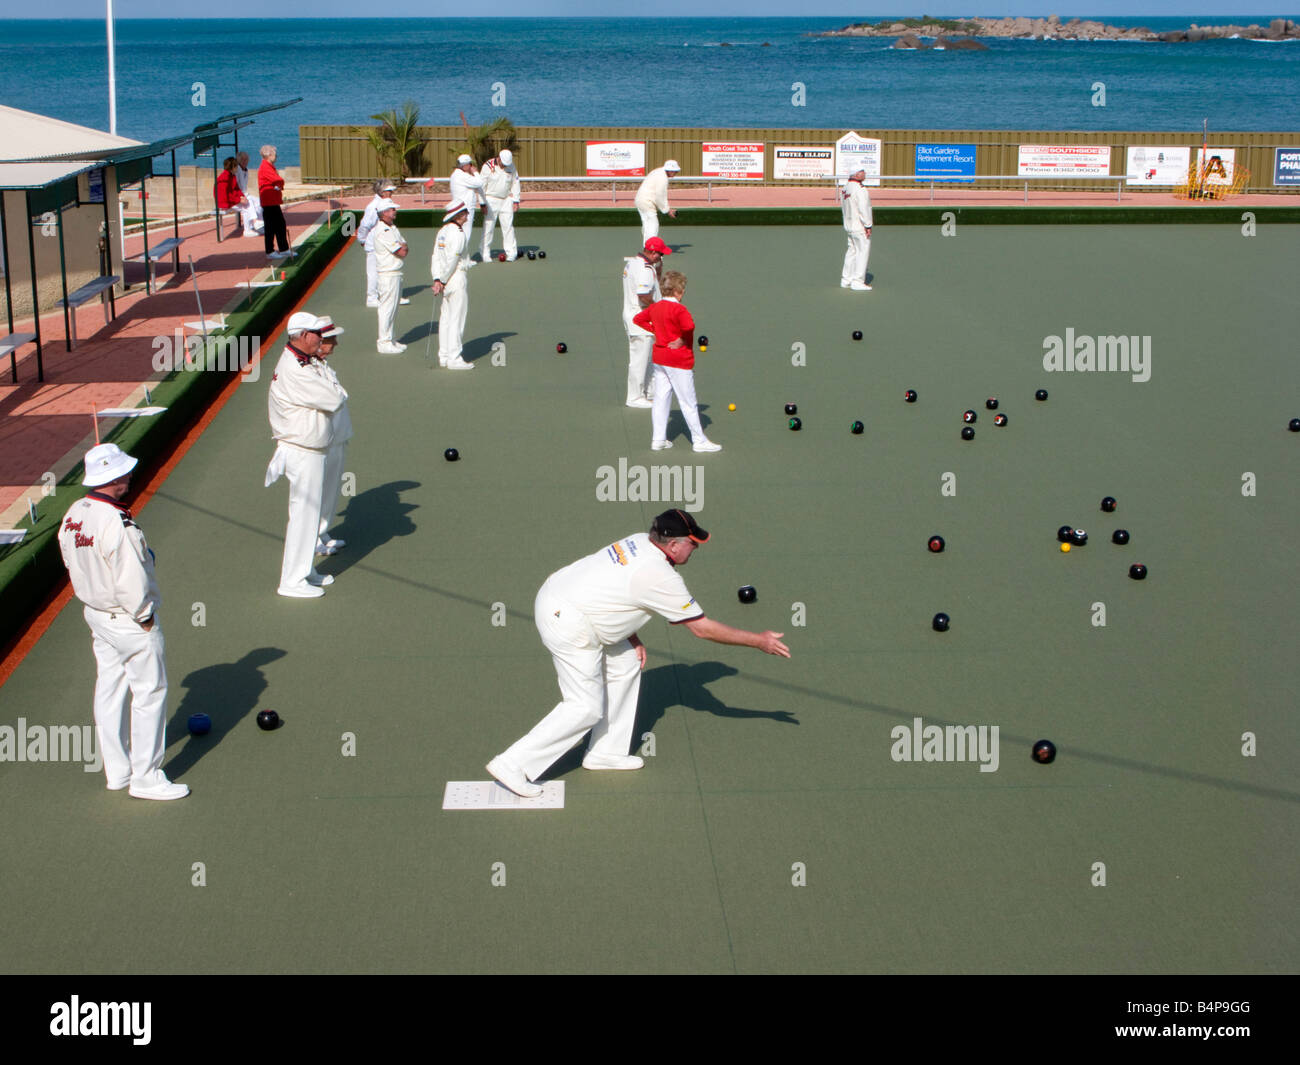 Bowlers dressed in white playing lawn bowls by the sea at Port Elliot in South Australia near Adelaide 2008 Stock Photo